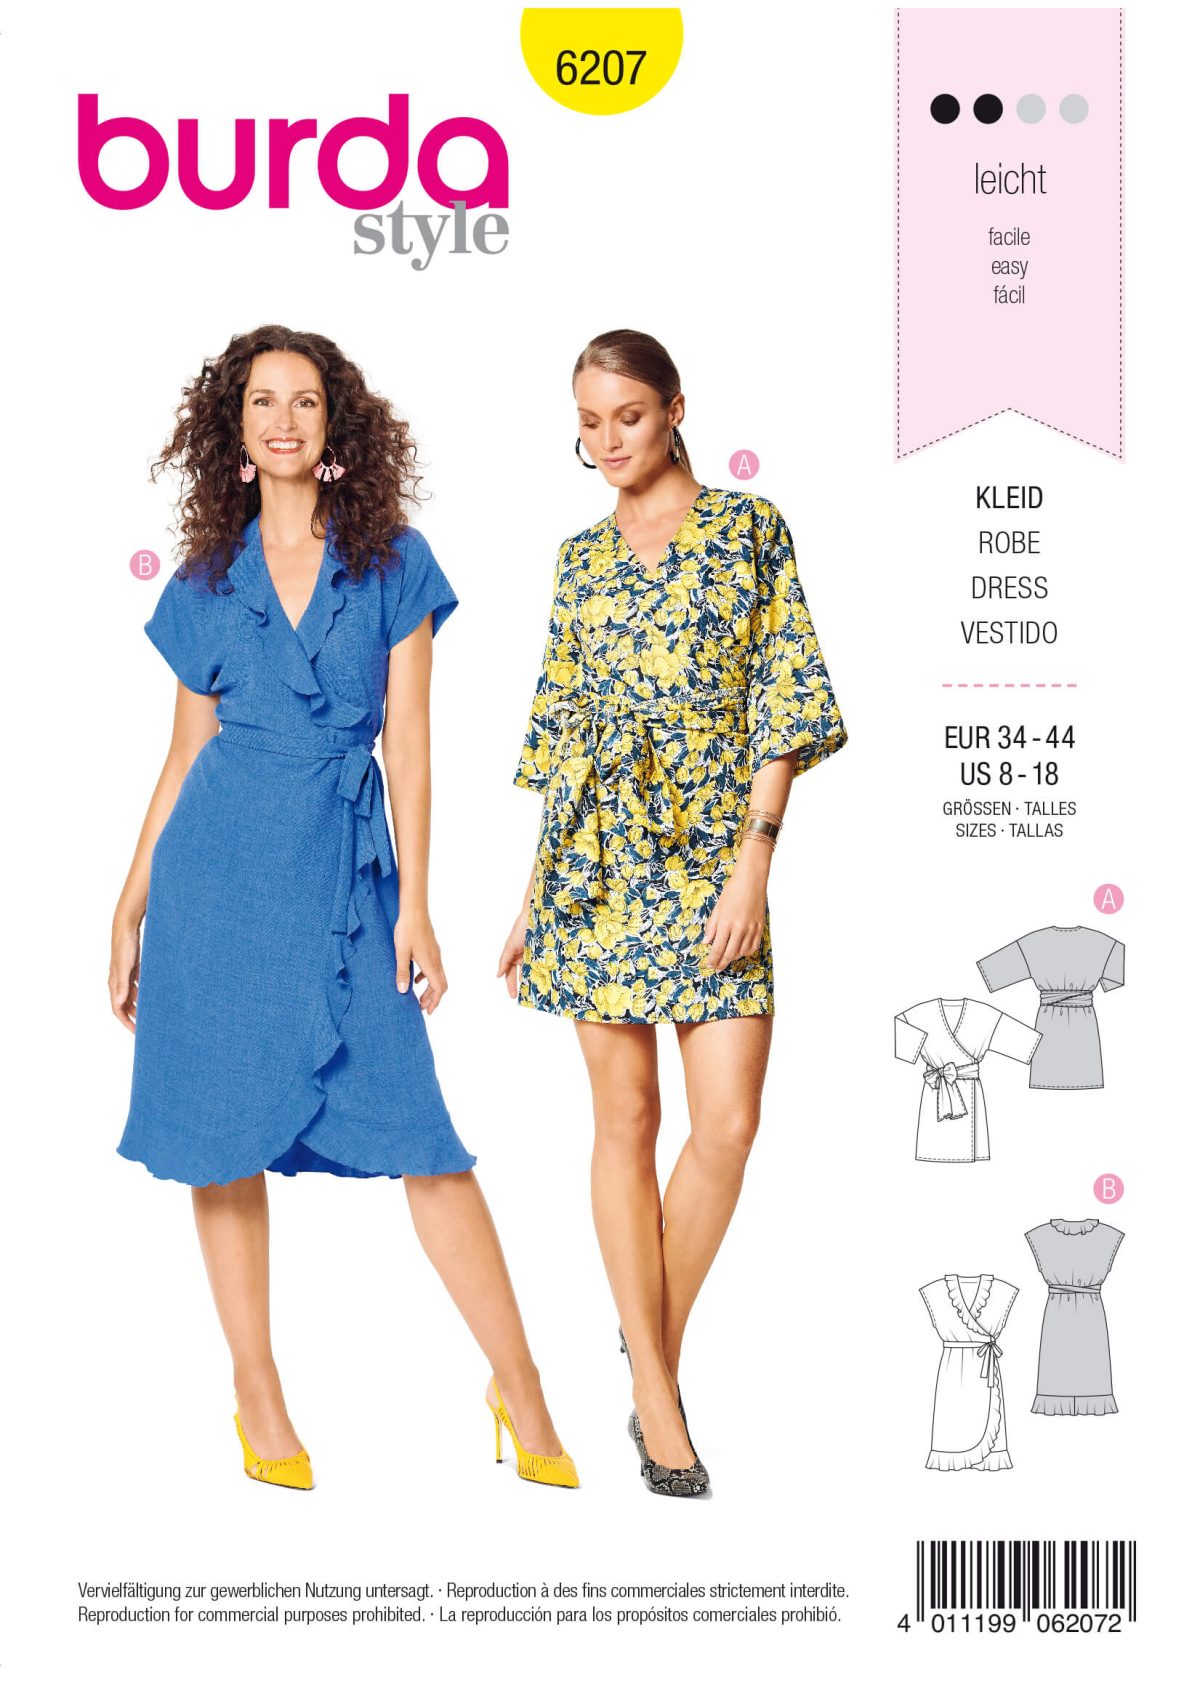 Burda Style Pattern 6207 Misses' Pull-On Dresses With Variations